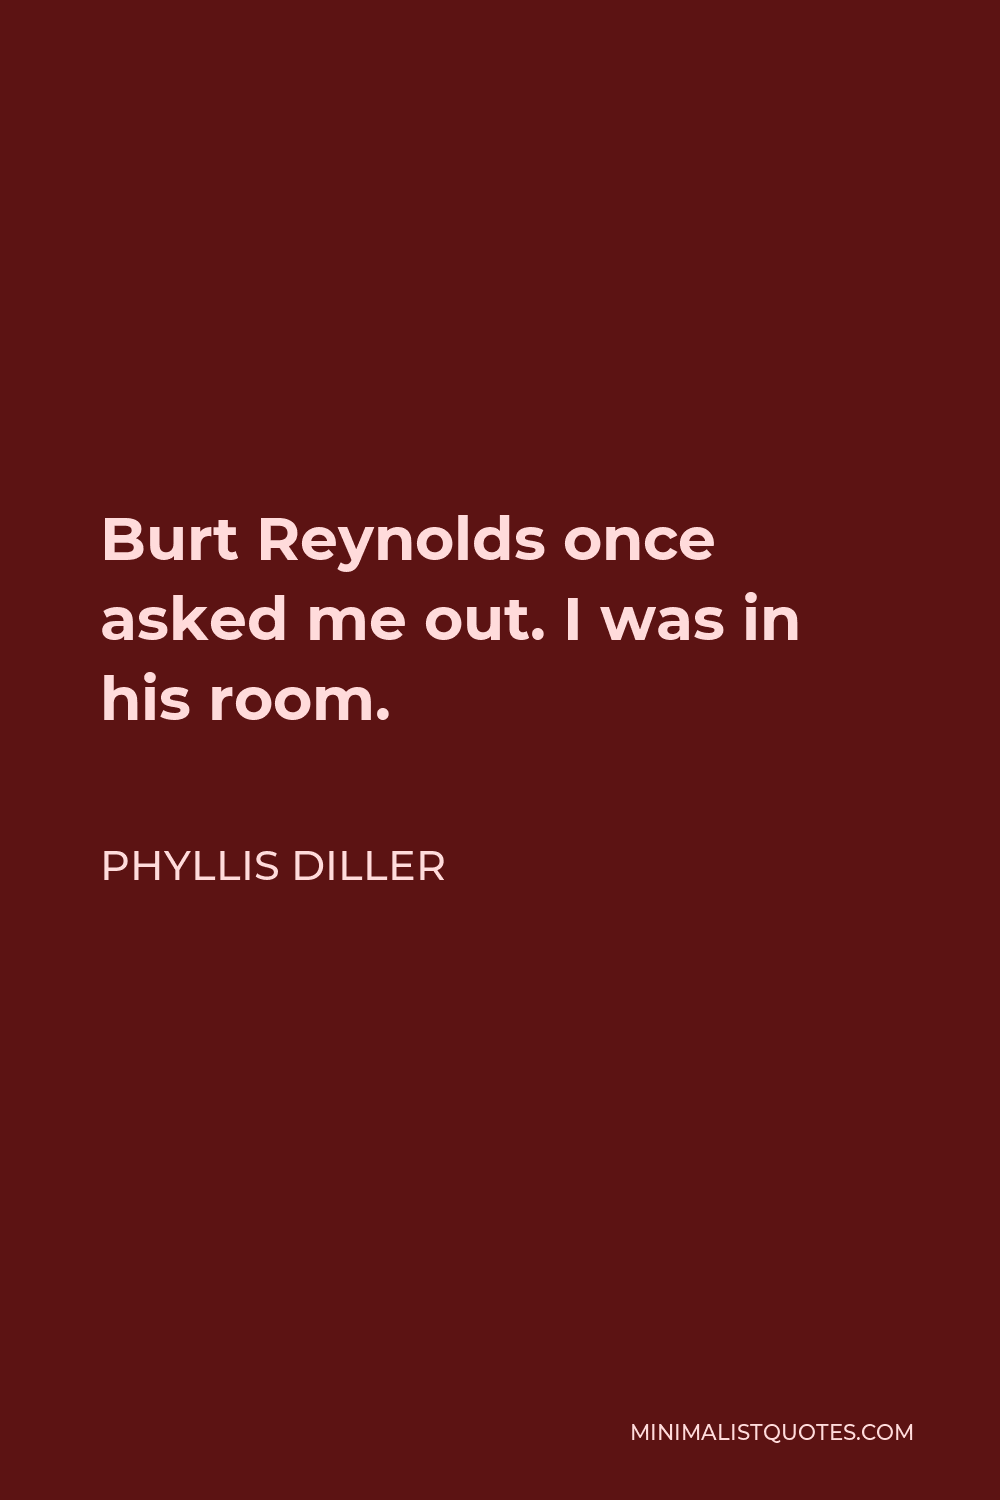 Phyllis Diller Quote - Burt Reynolds once asked me out. I was in his room.